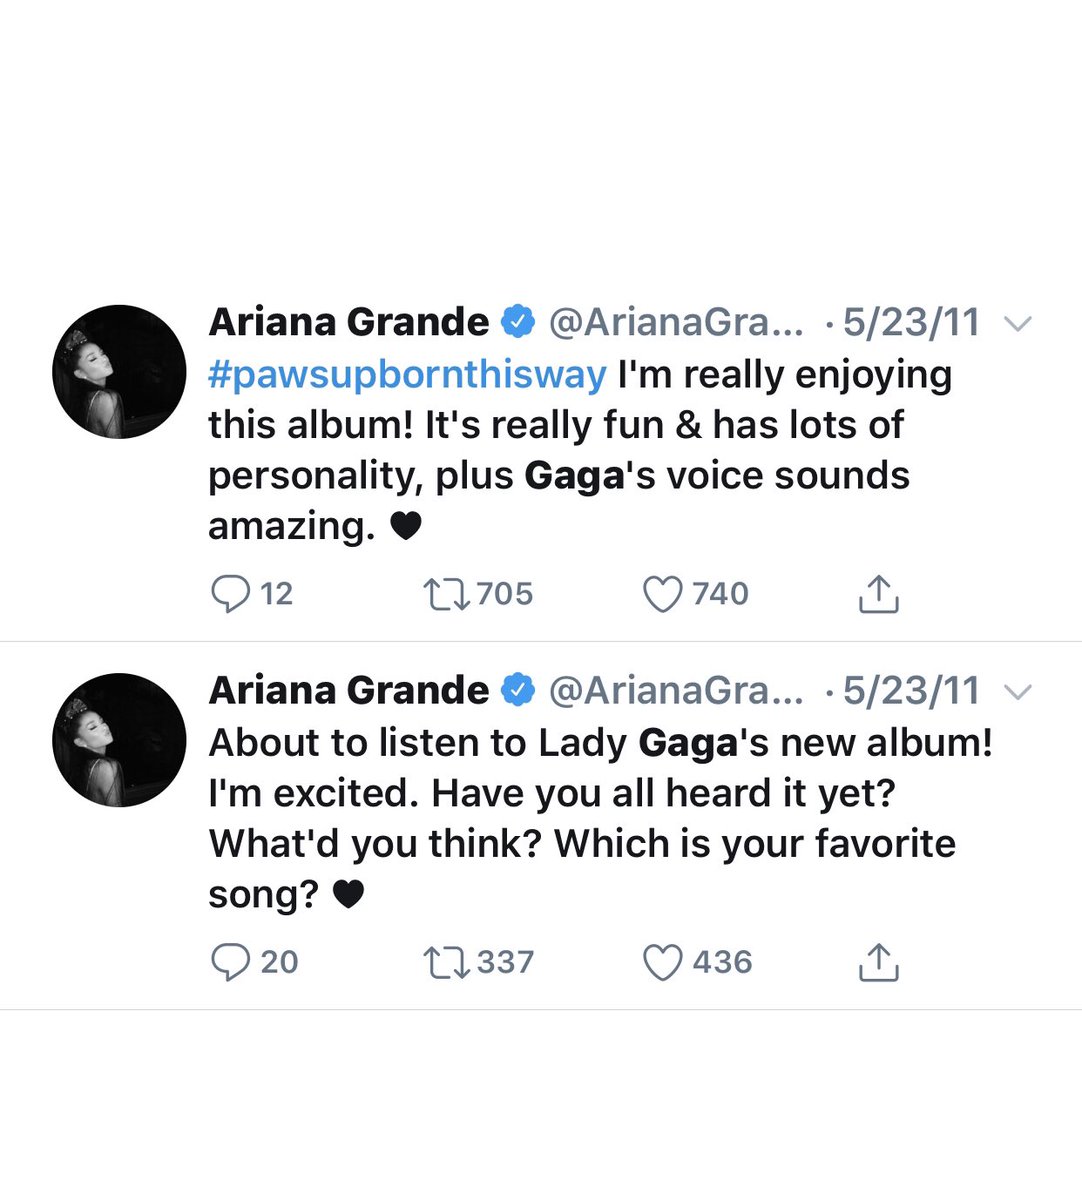 Ariana showed her support for the Born This Way album when it was released also. The taste!